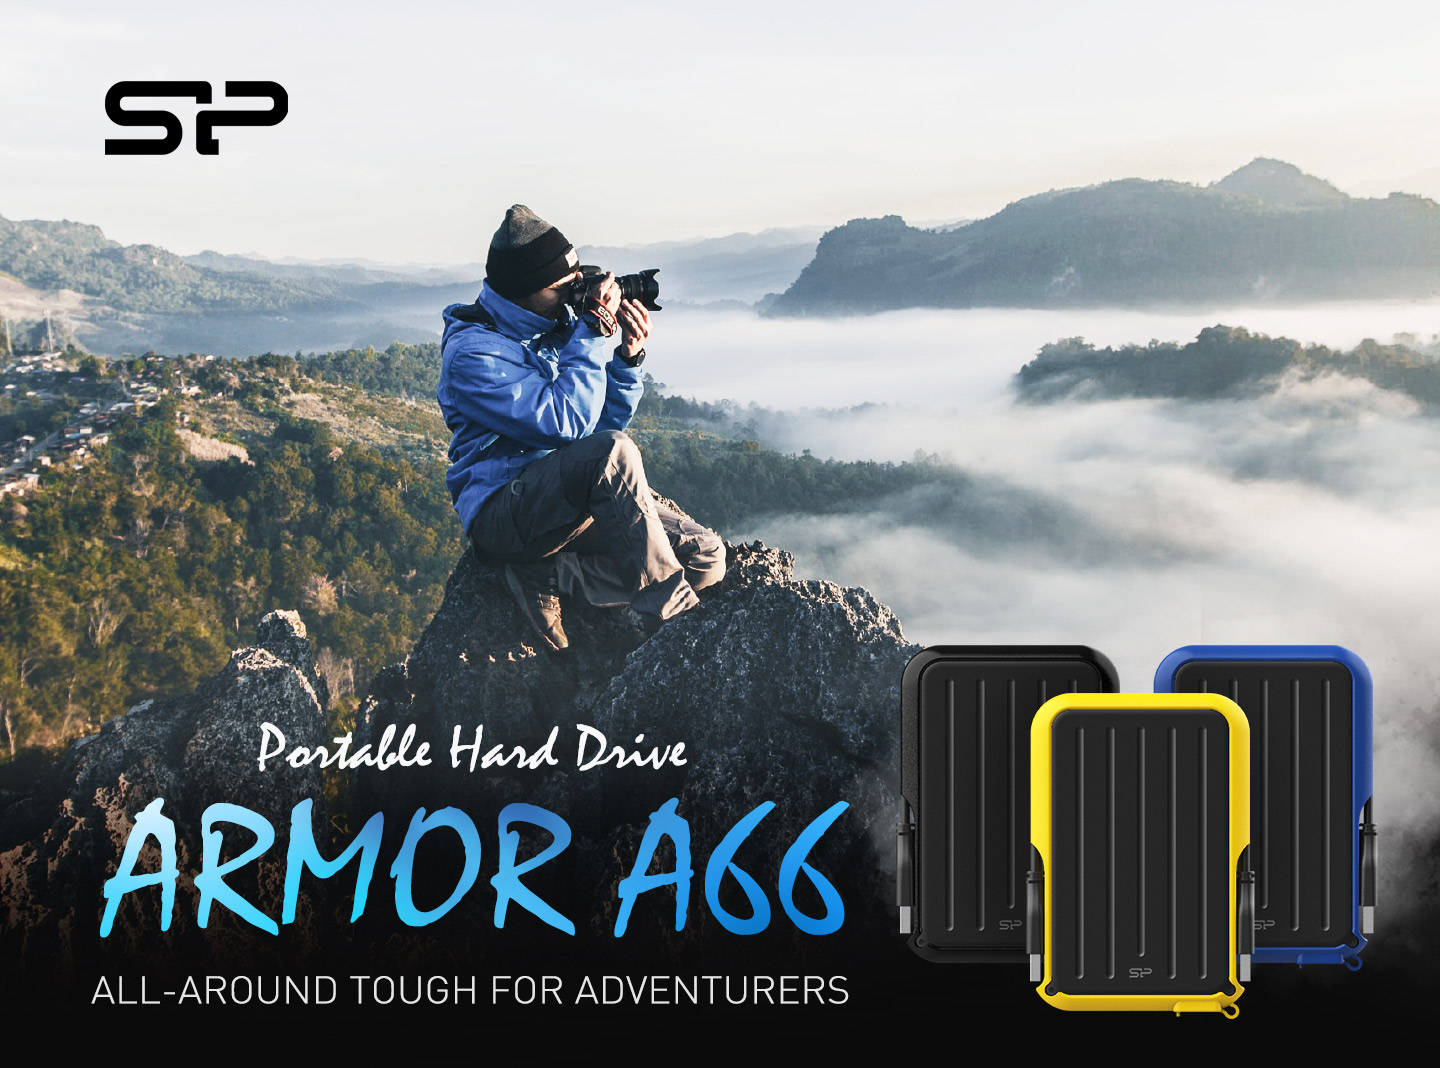 External-Hard-Drives-Silicon-Power-4TB-A66-Rugged-Shockproof-Water-resistant-Portable-External-Hard-Drive-USB-3-0-Yellow-3